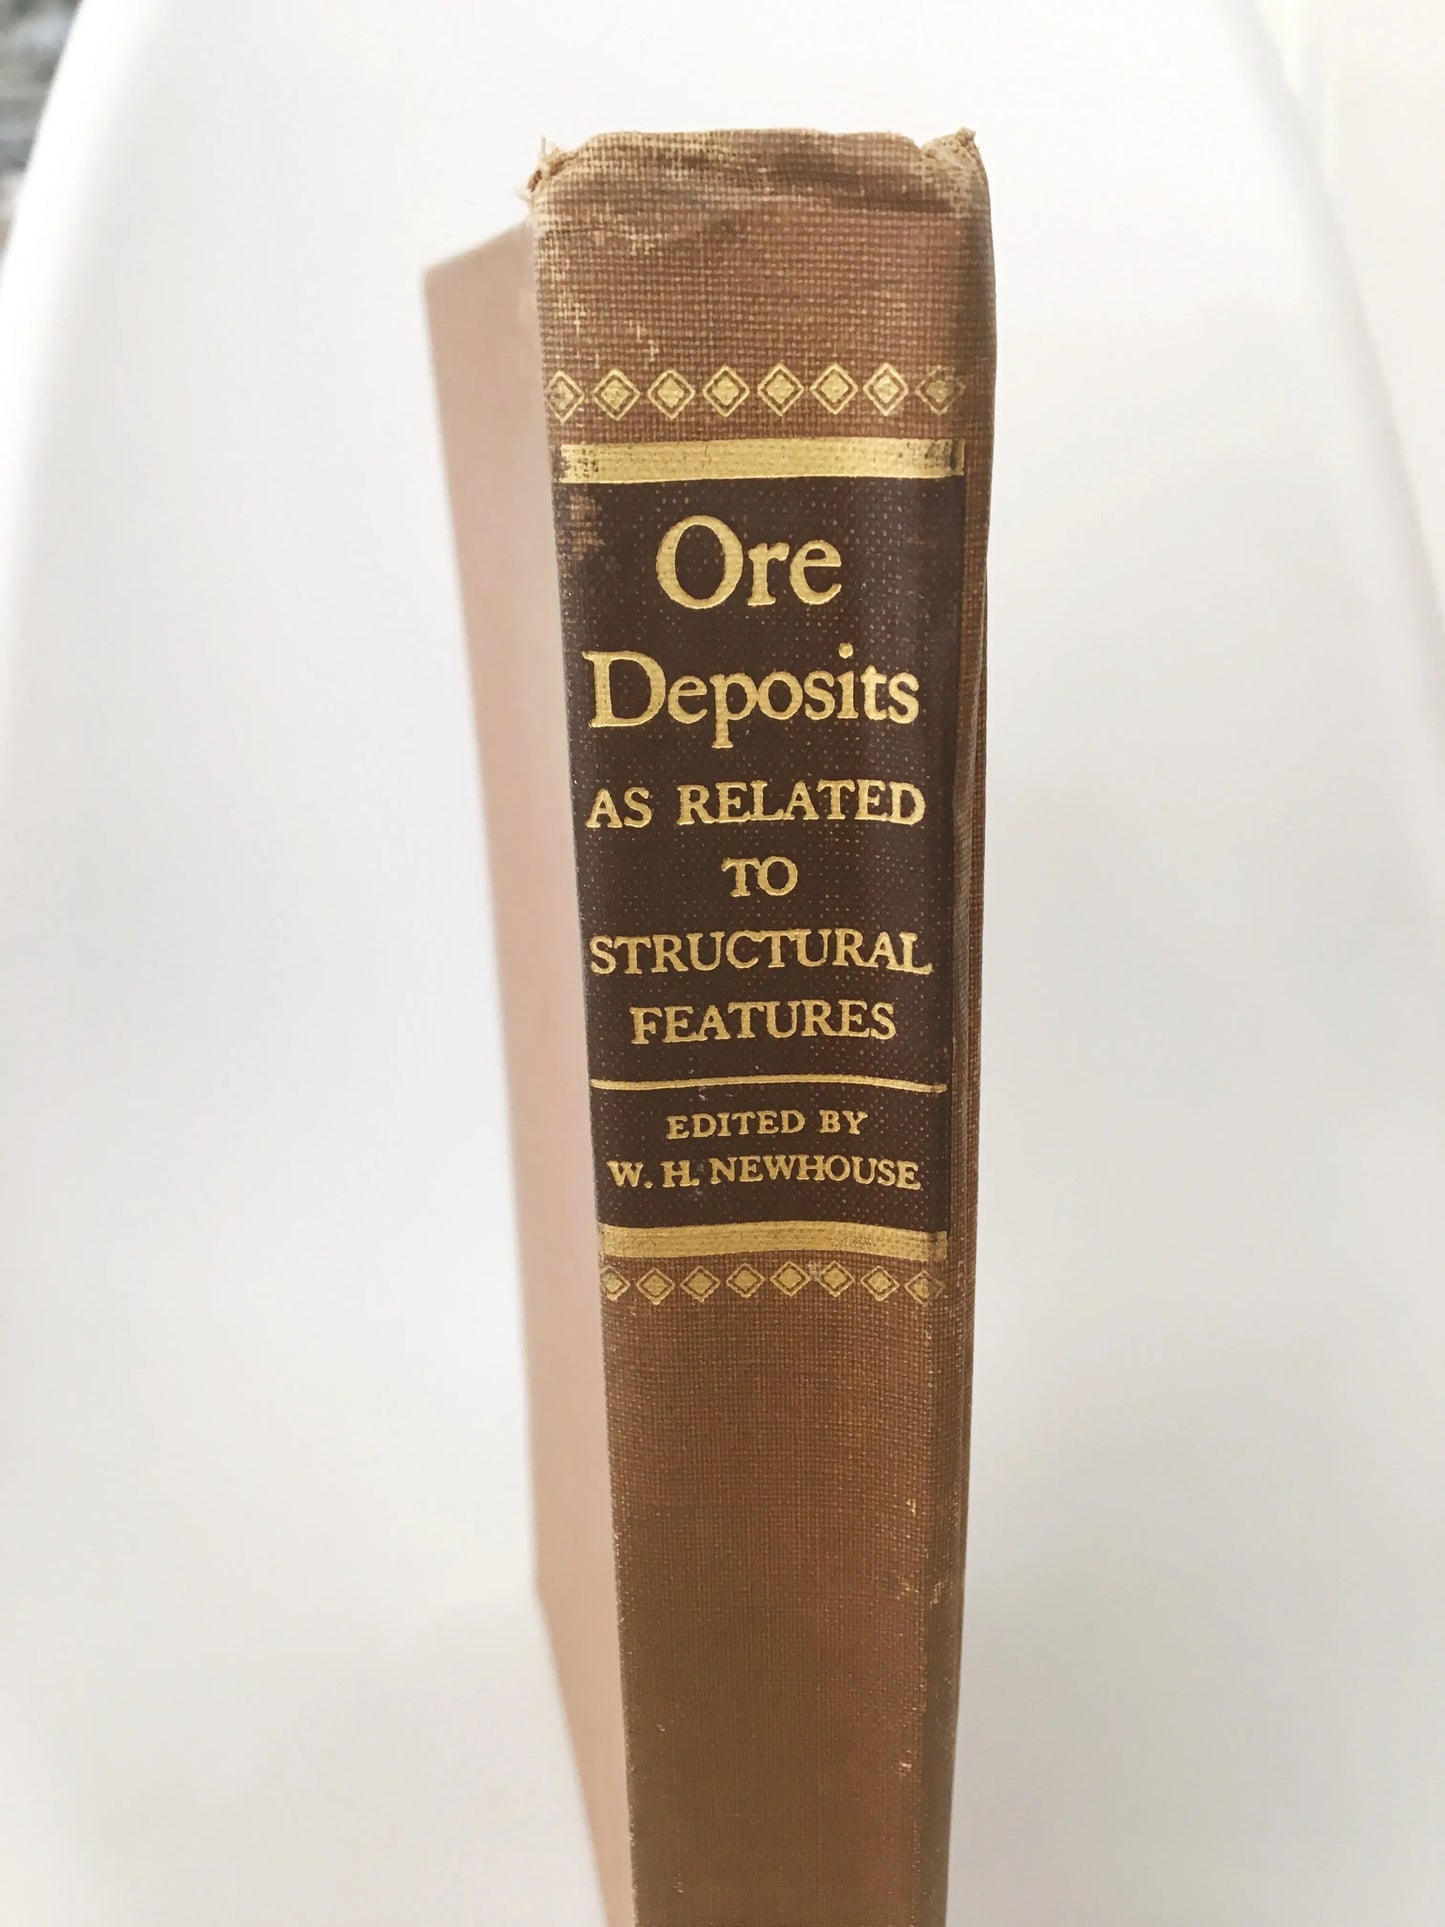 Ore Deposits as Related to Structural Features - THE STEMCELL SCIENCE SHOP